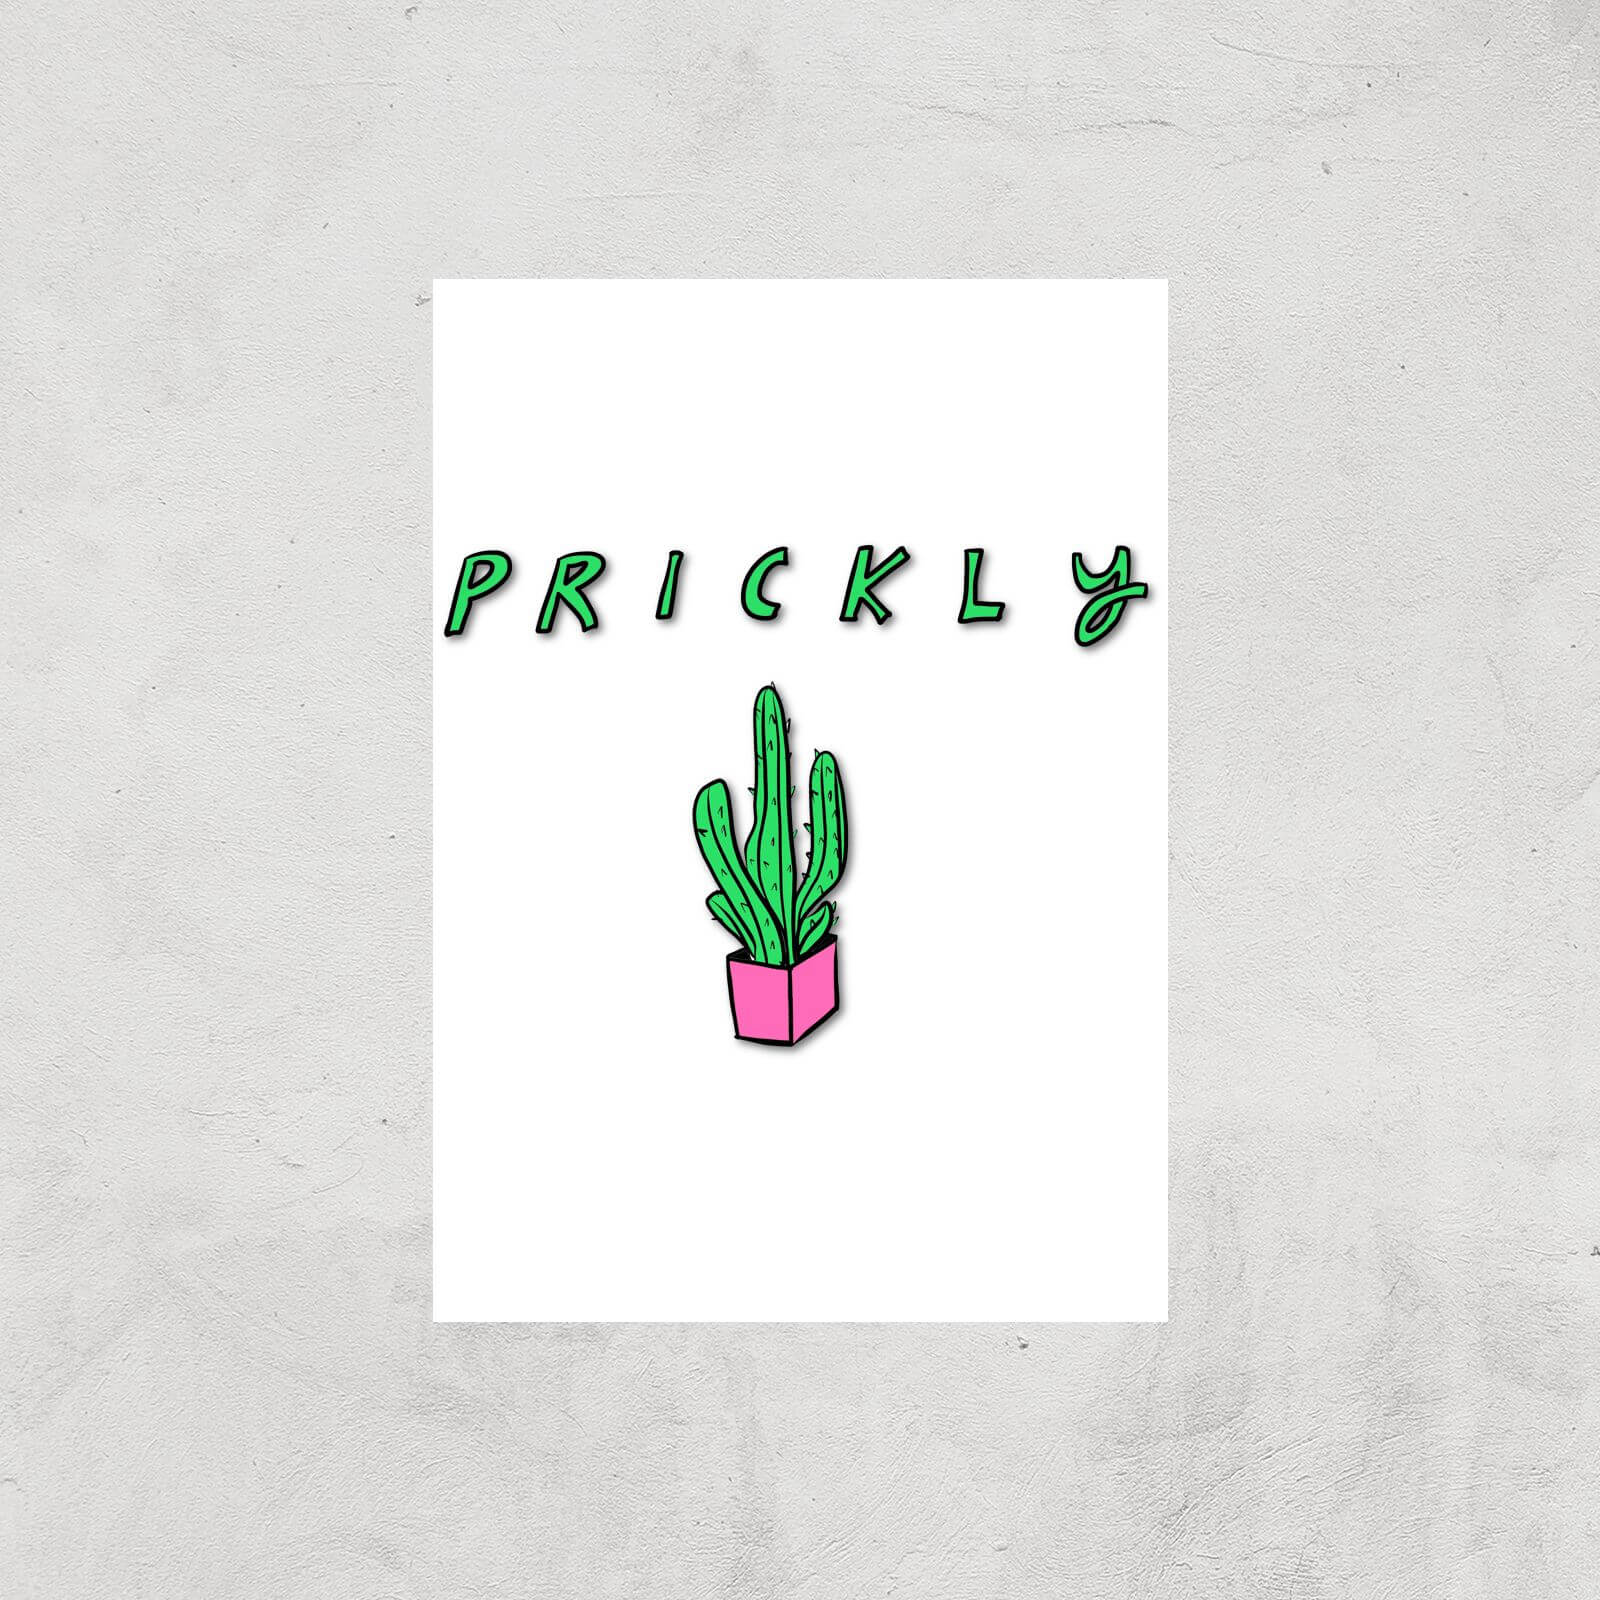 Rock On Ruby Prickly Art Print - A4 - Print Only